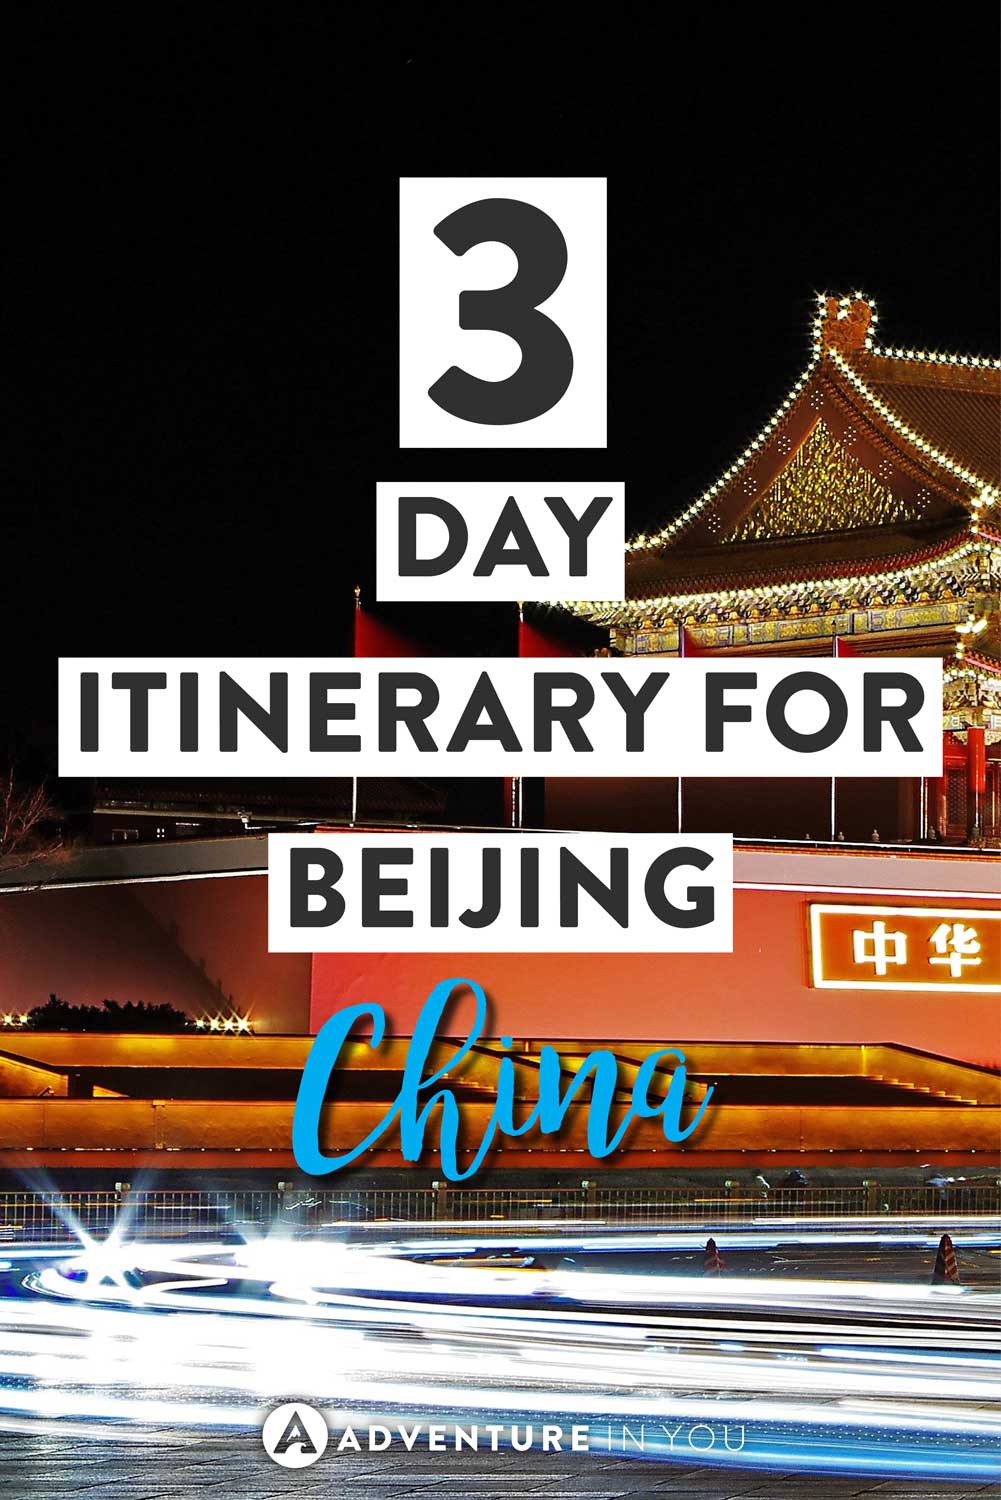 Beijing China | Planning a trip to Beijing and looking for an itinerary? Check out our 3 day itinerary taking you through some of the best things to do, places to eat, and sights to see in Beijing.